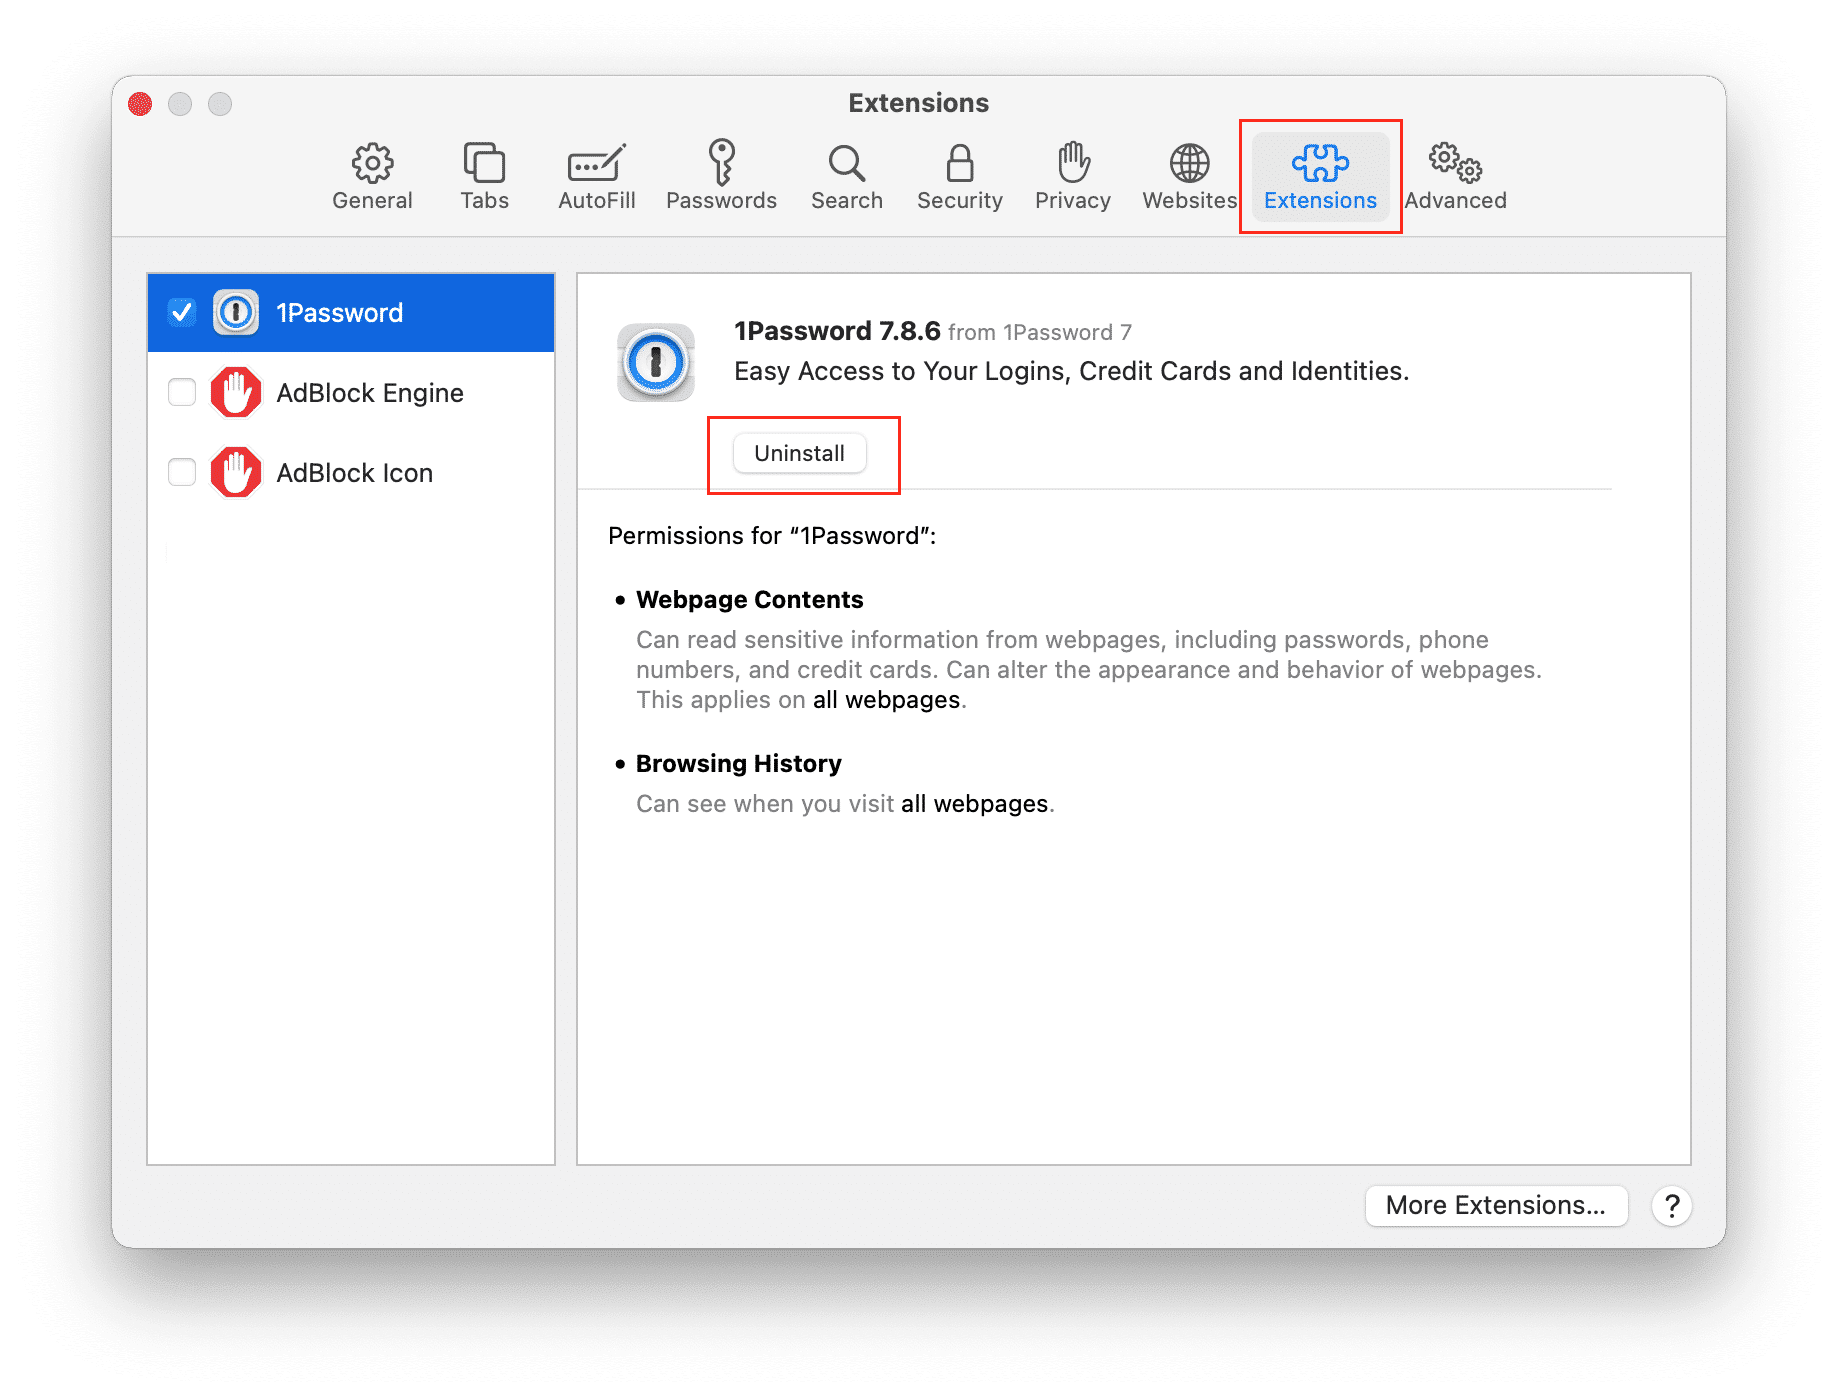 Safari Preferences window showing how to uninstall extensions